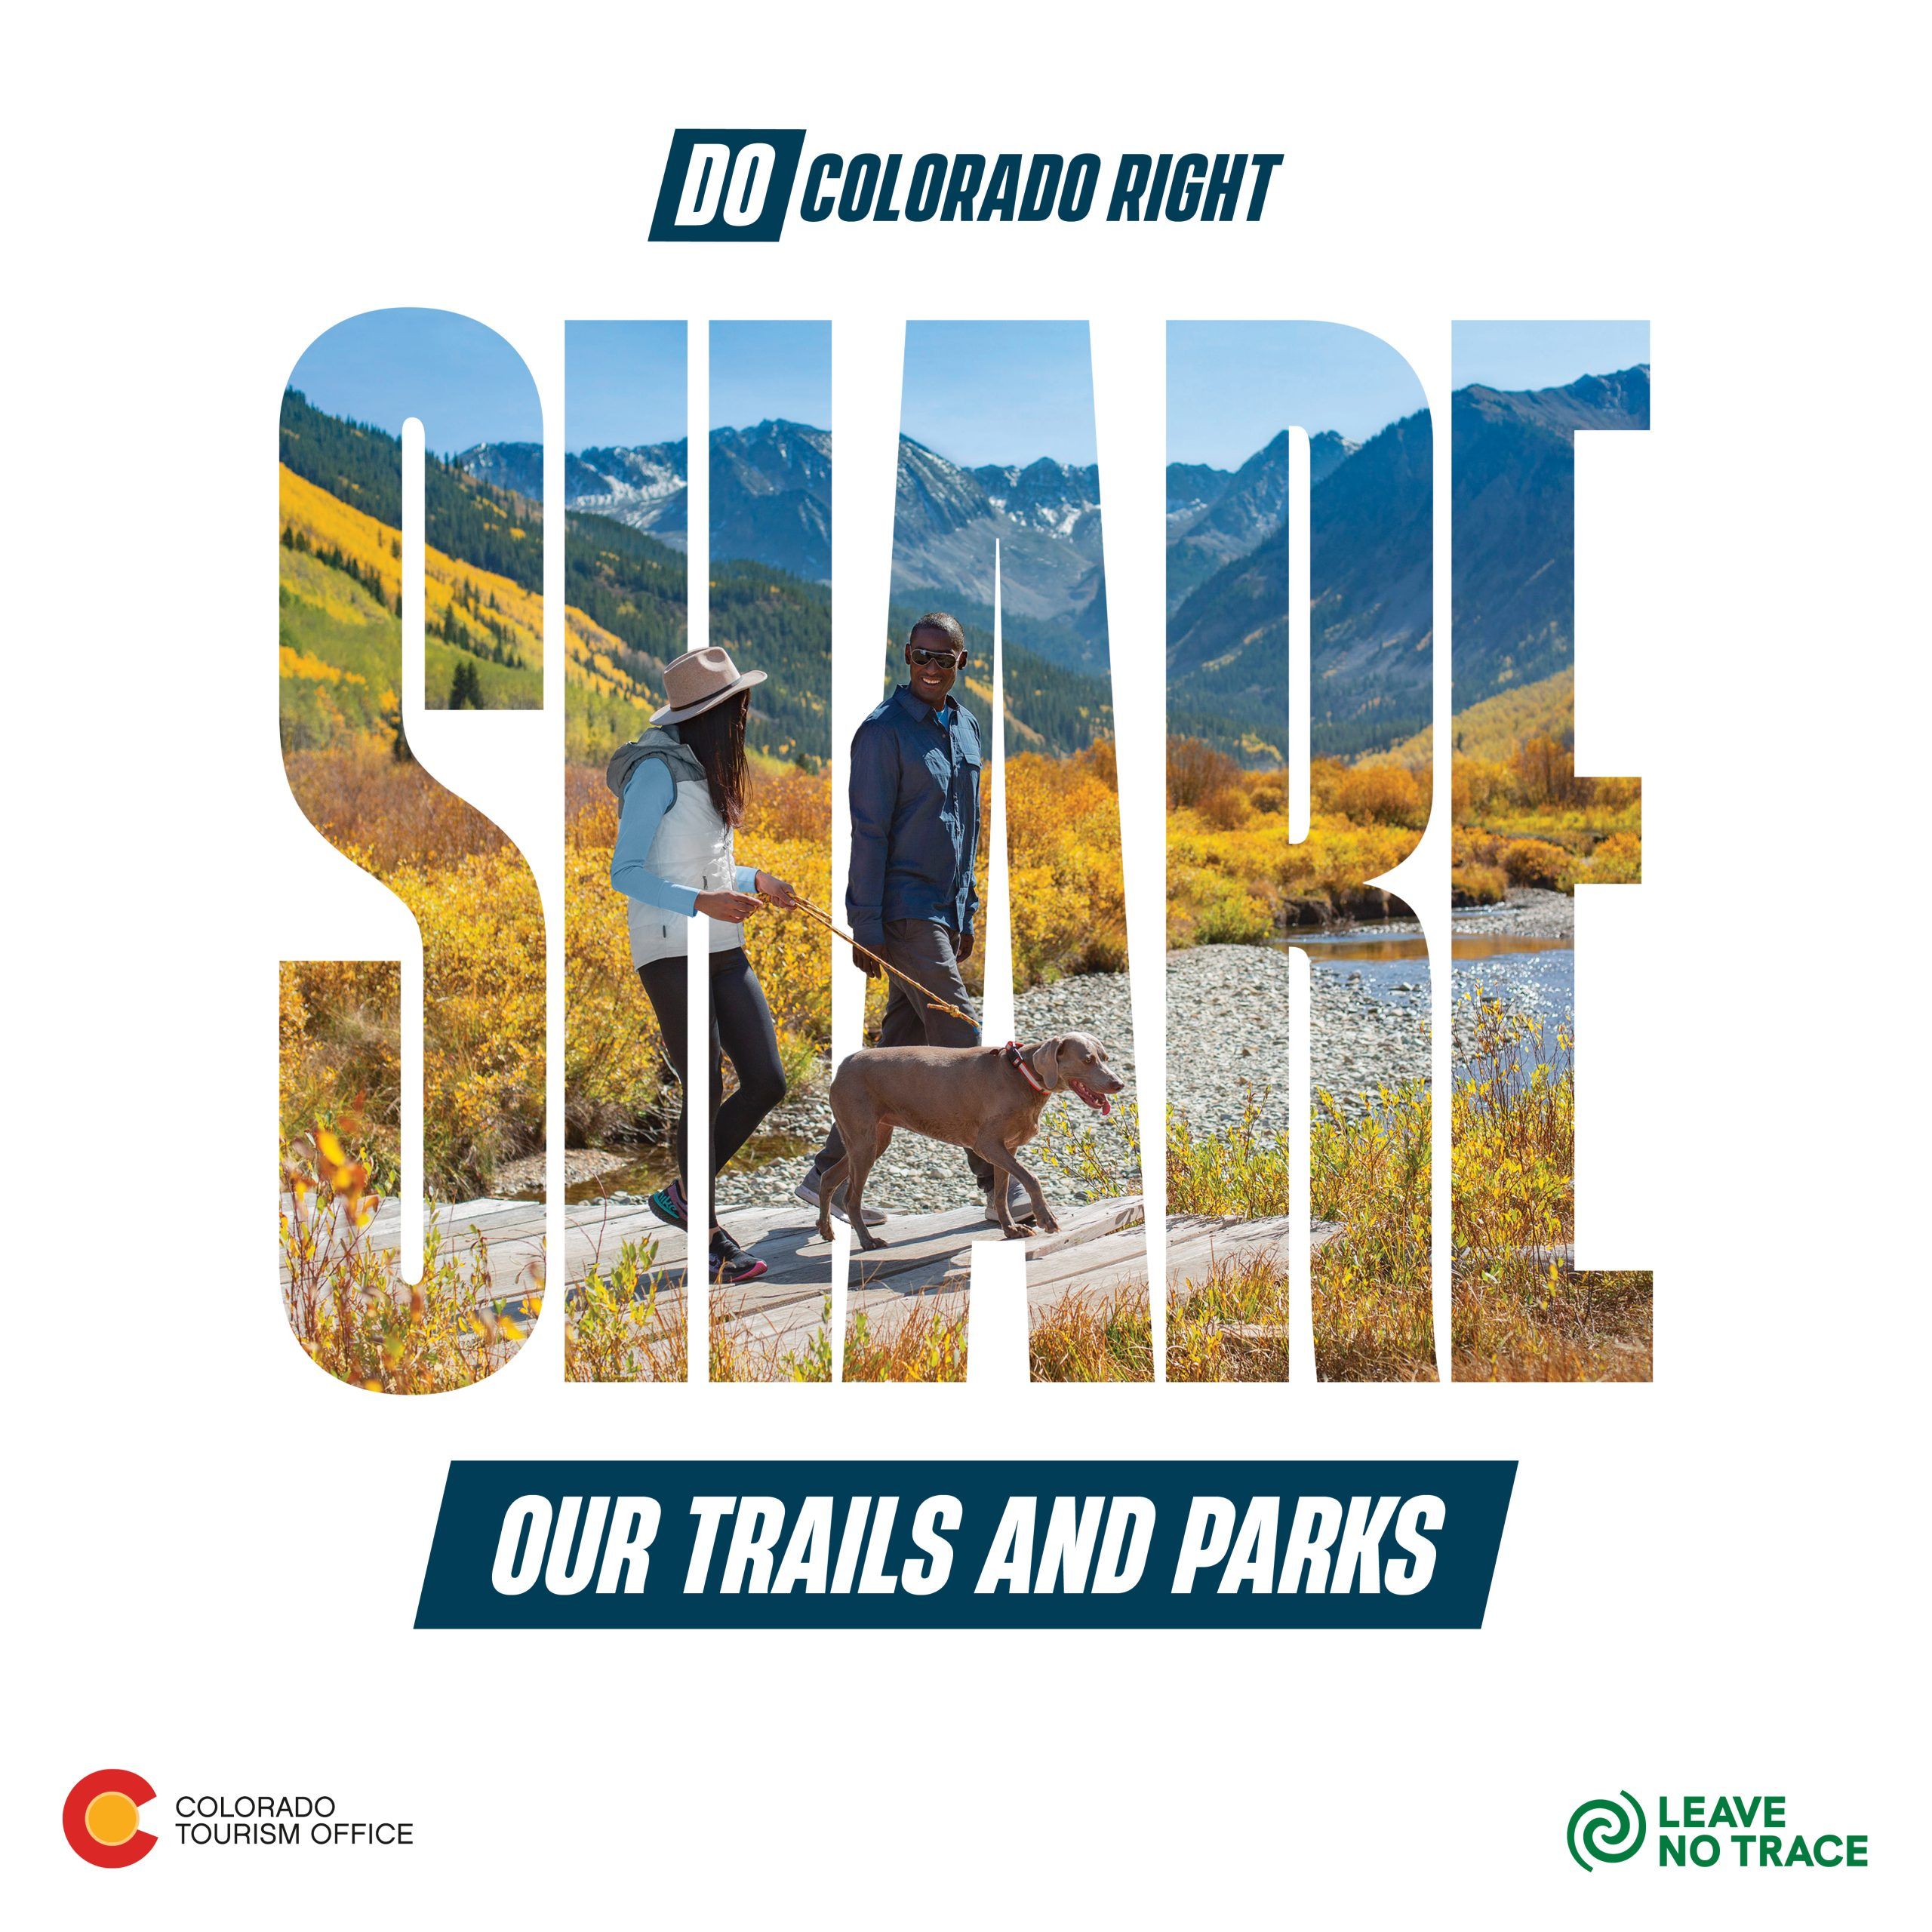 Share our trails and parks